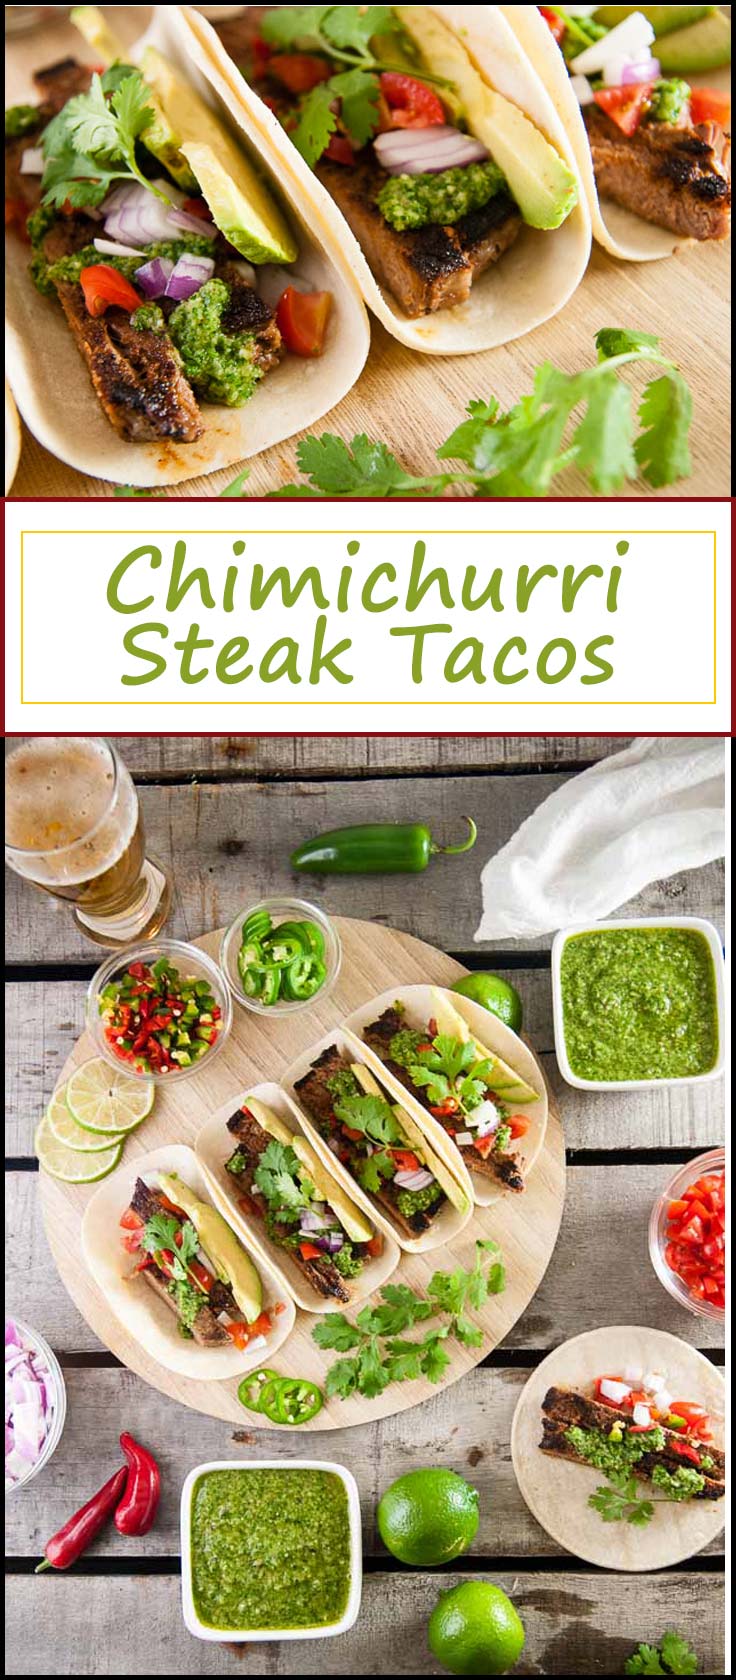 Chimichurri Steak Tacos are a bold taco recipe perfect for dinner on taco Tuesday from www.seasonedsprinkles.com